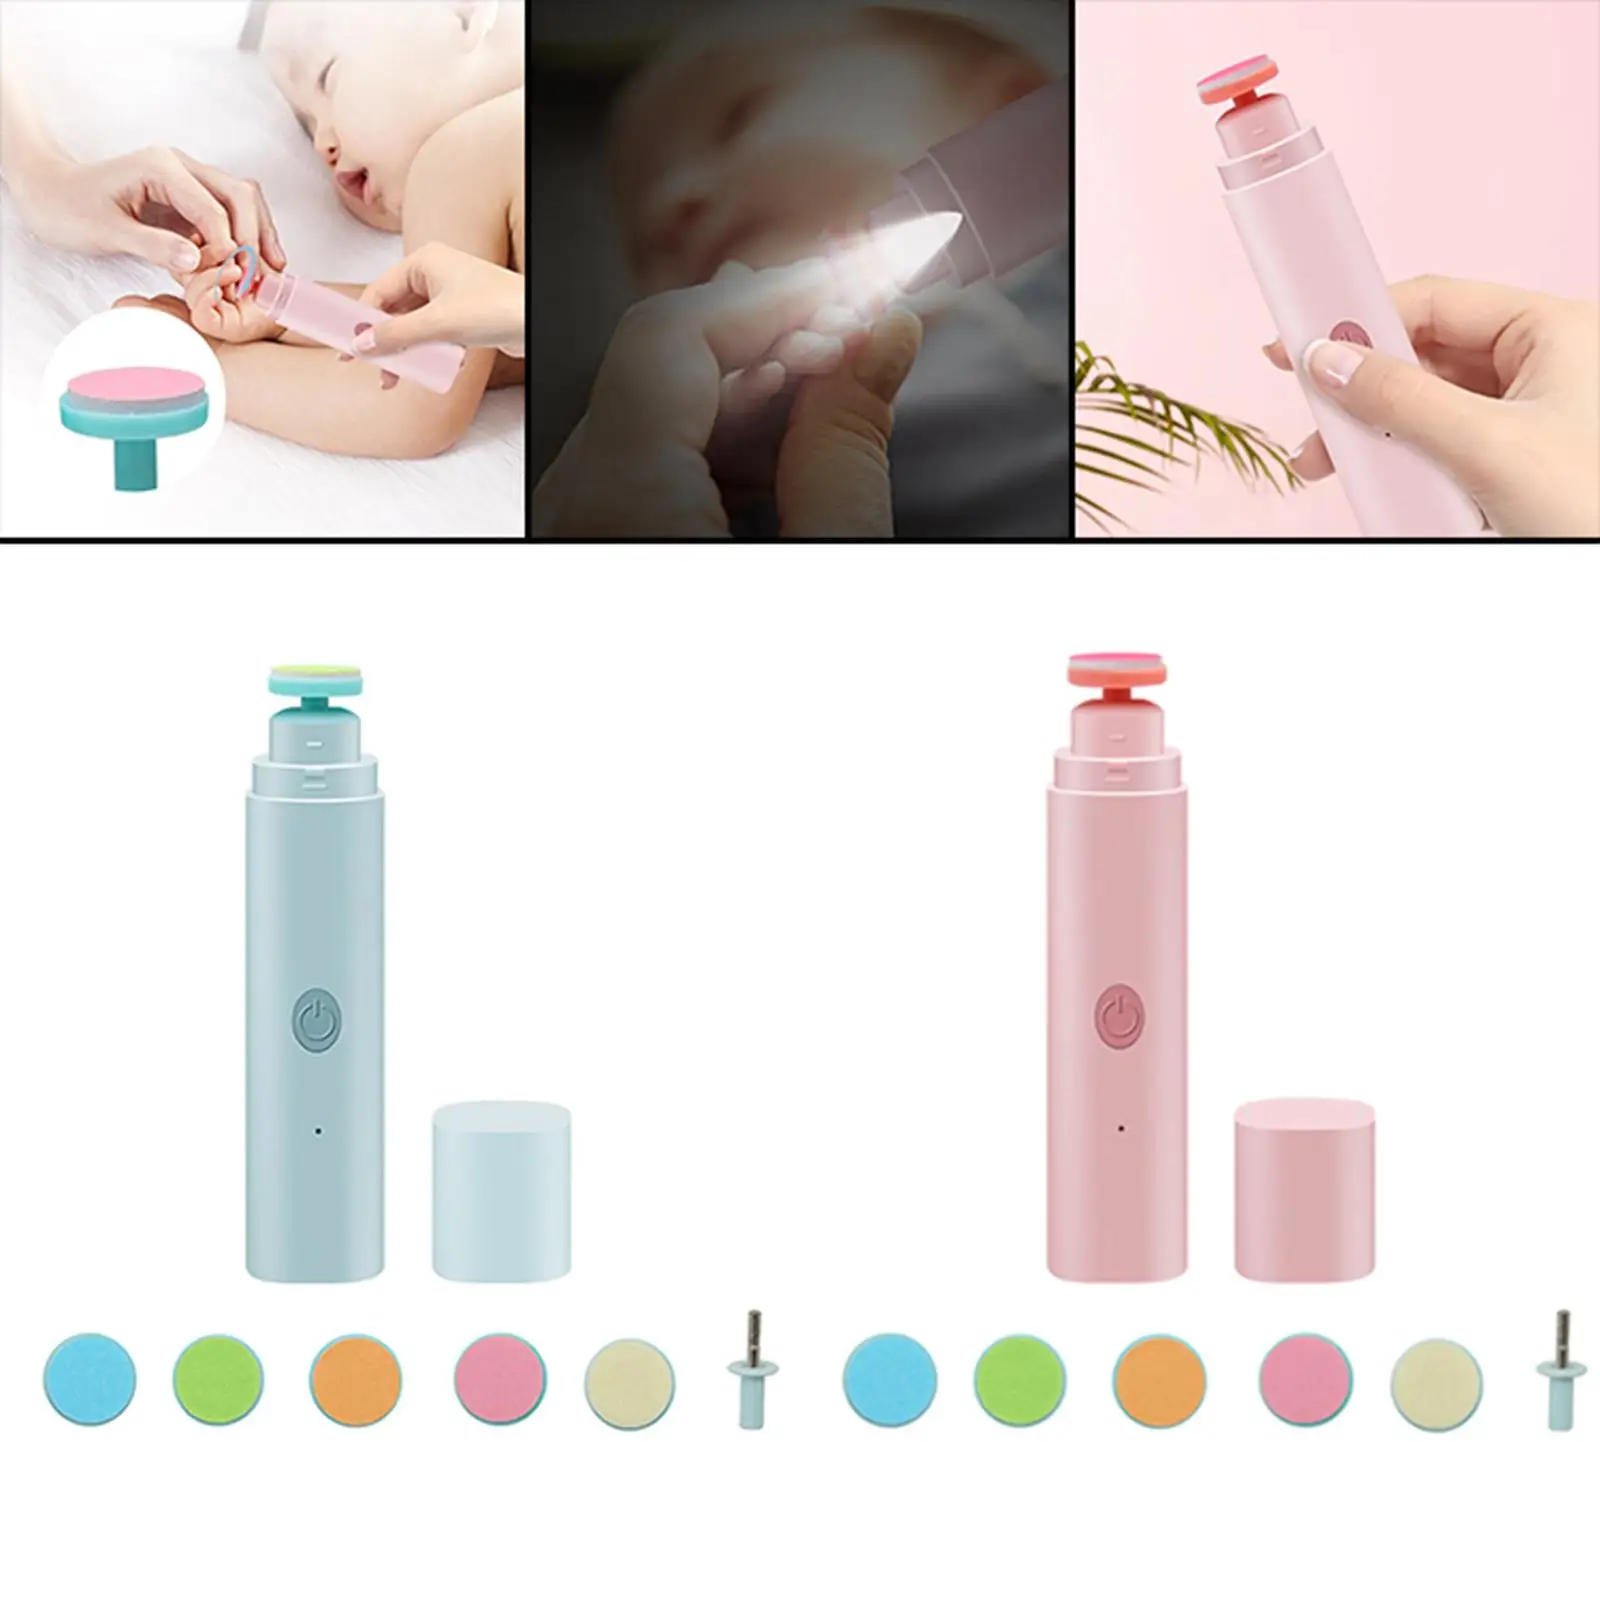 Nail File Drill for Baby Manicure Care 6 Grinding Heads for Toes Fingernails